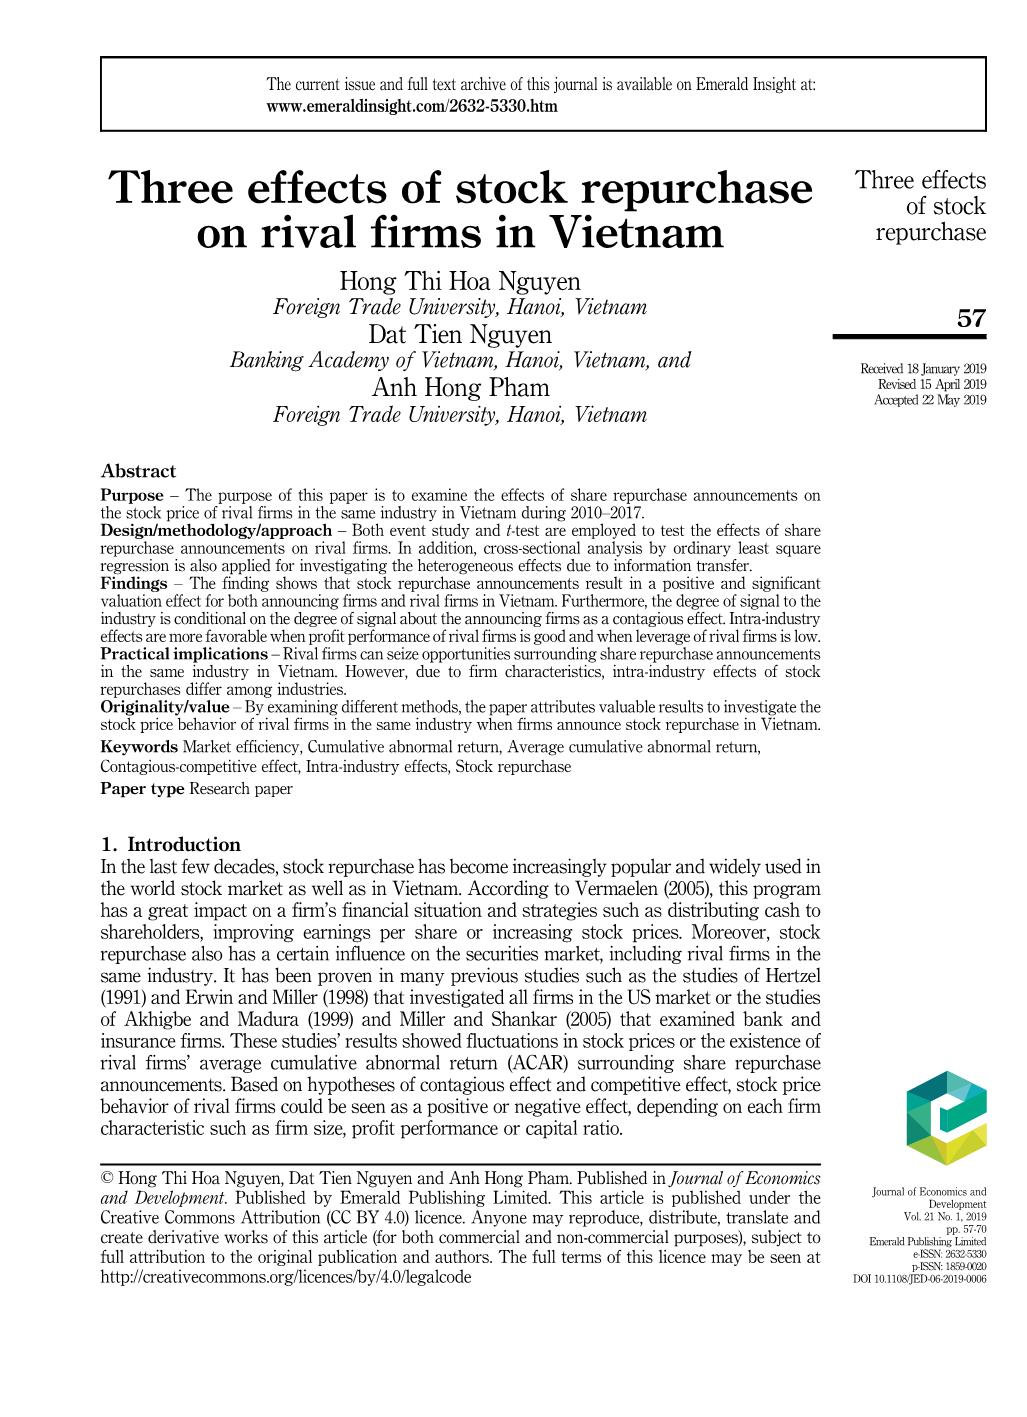 Three effects of stock repurchase on rival firms in Vietnam trang 1